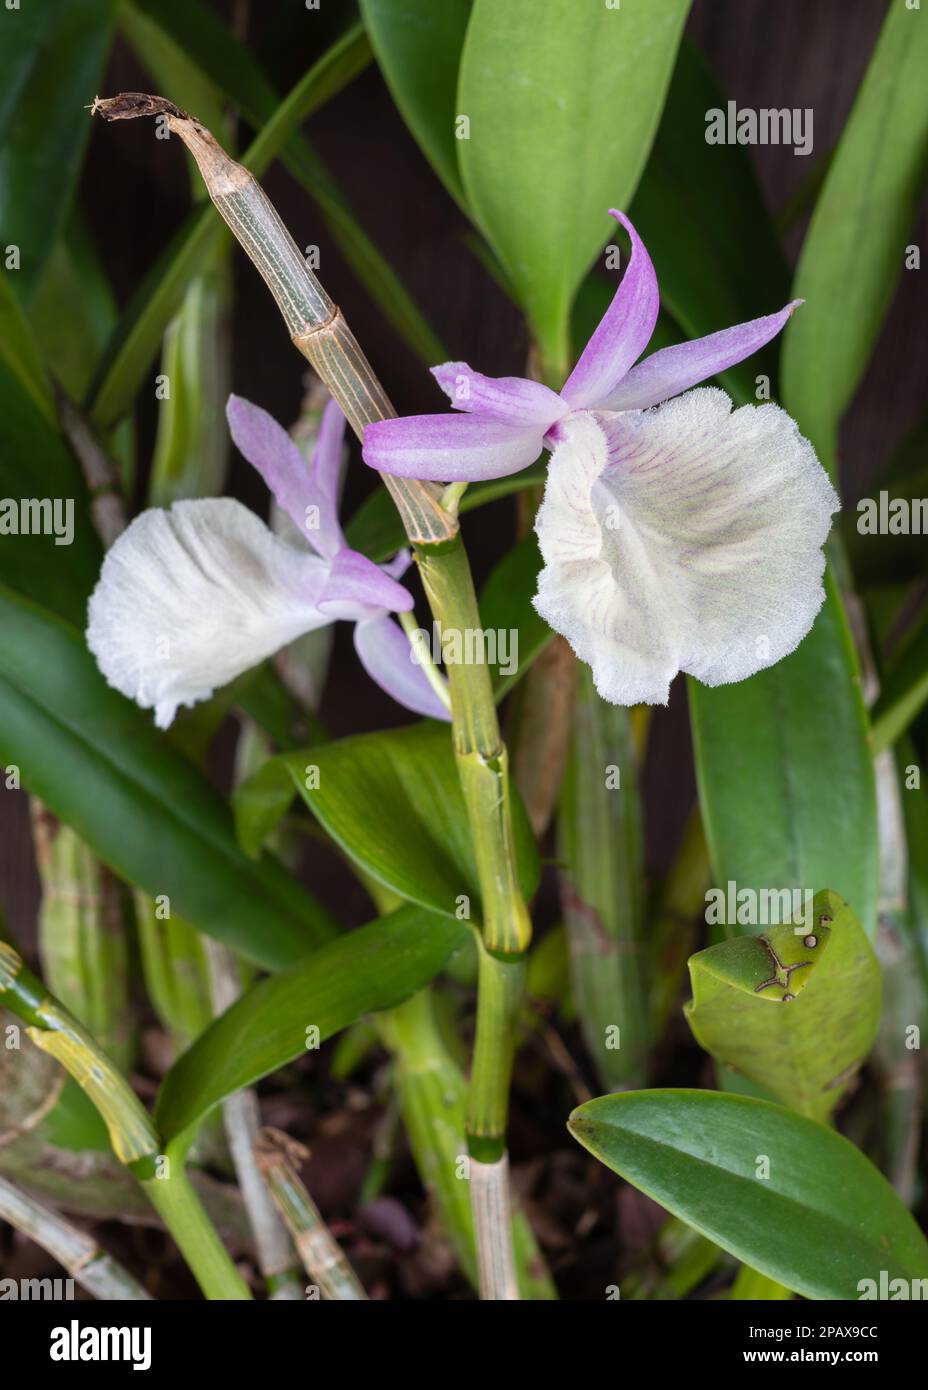 Closeup view of purple pink and creamy white flower of epiphytic orchid species dendrobium primulinum aka primrose dendrobium on dark background Stock Photo